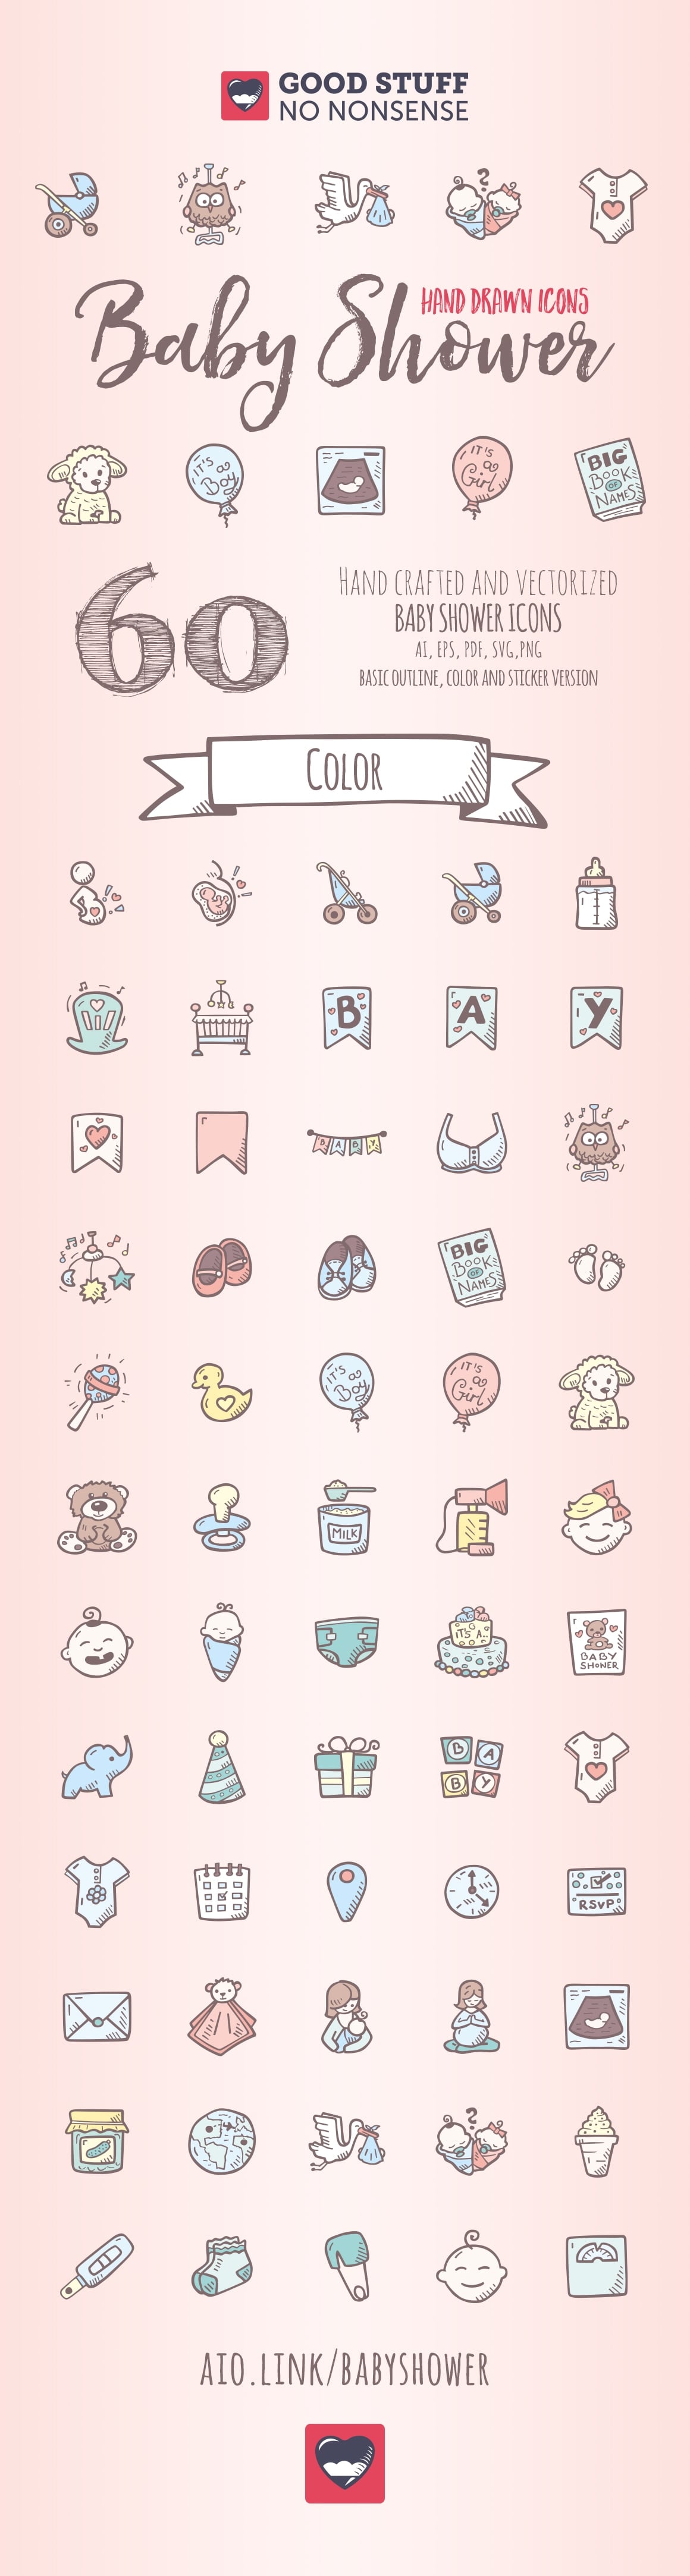 Baby Shower Hand Drawn Vector Icons Color Full